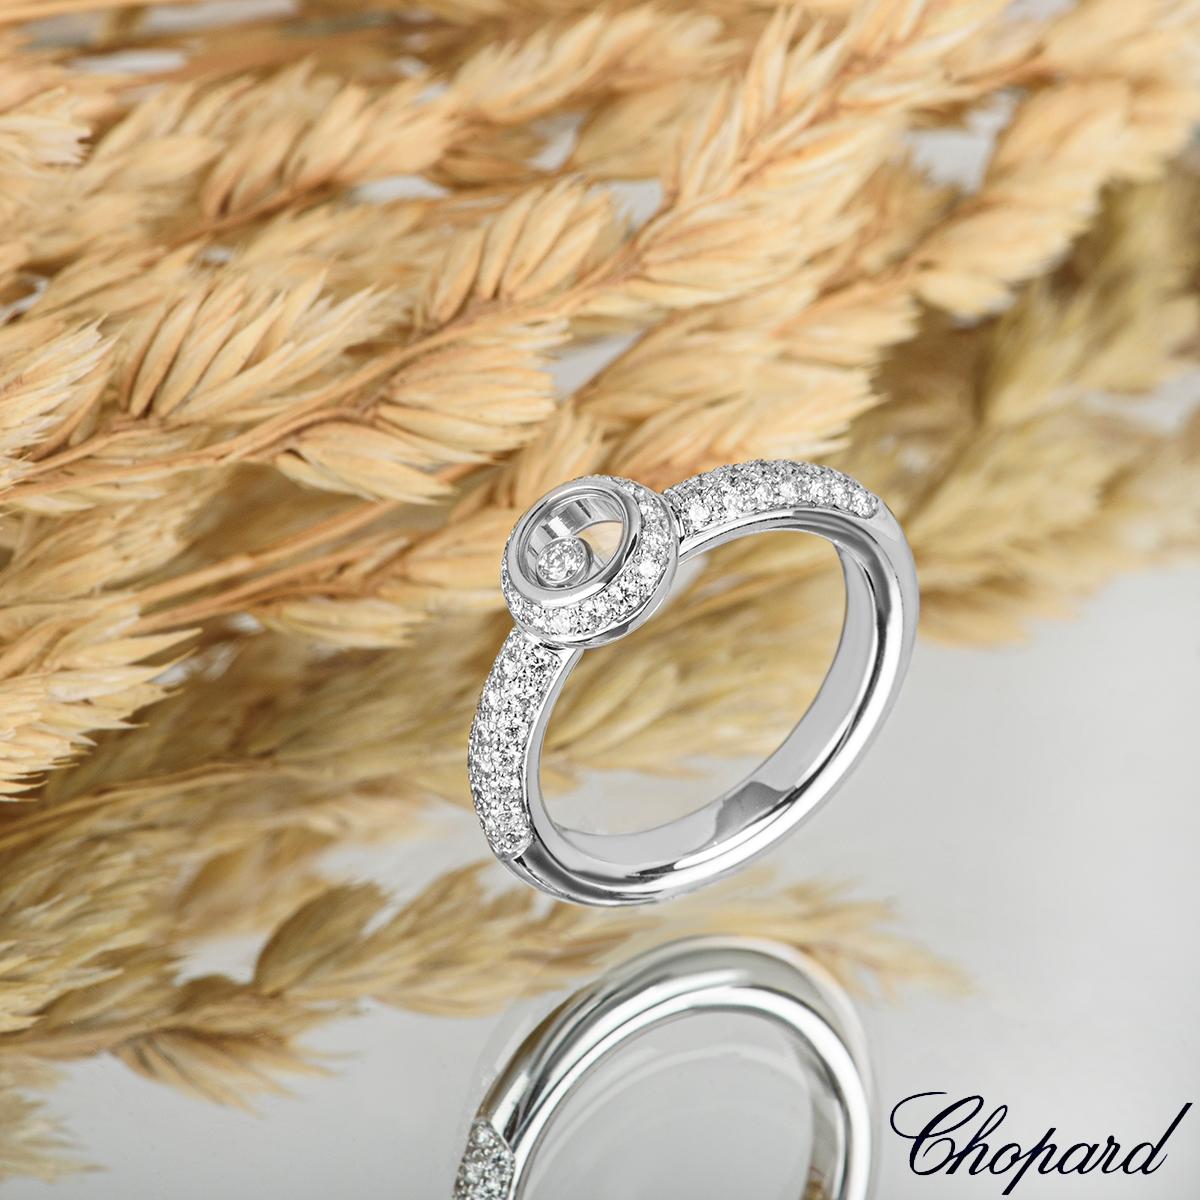 Chopard White Gold Happy Diamonds Ring 82/2902-1110 For Sale 1